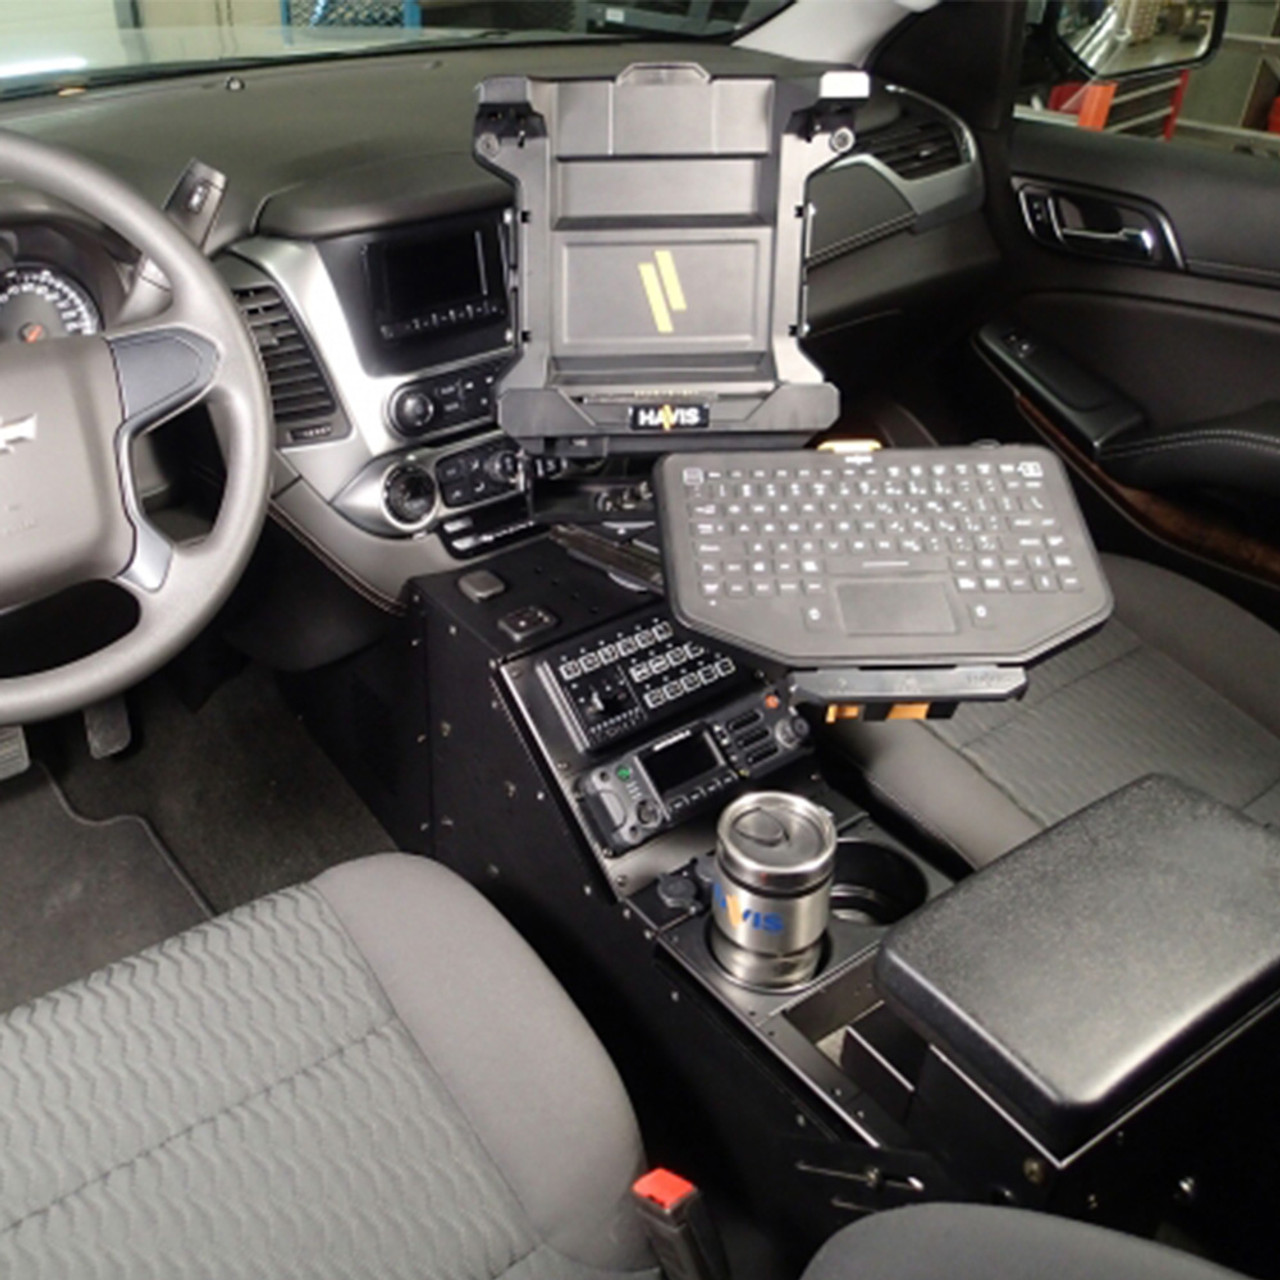 Havis C-VS-0812-TAH-1 20 Inch Vehicle Specific Console for 2015-2020 Chevy Tahoe Law Enforcement Pursuit Vehicle & 2015-2020 Chevy Suburban, includes faceplates and filler panels